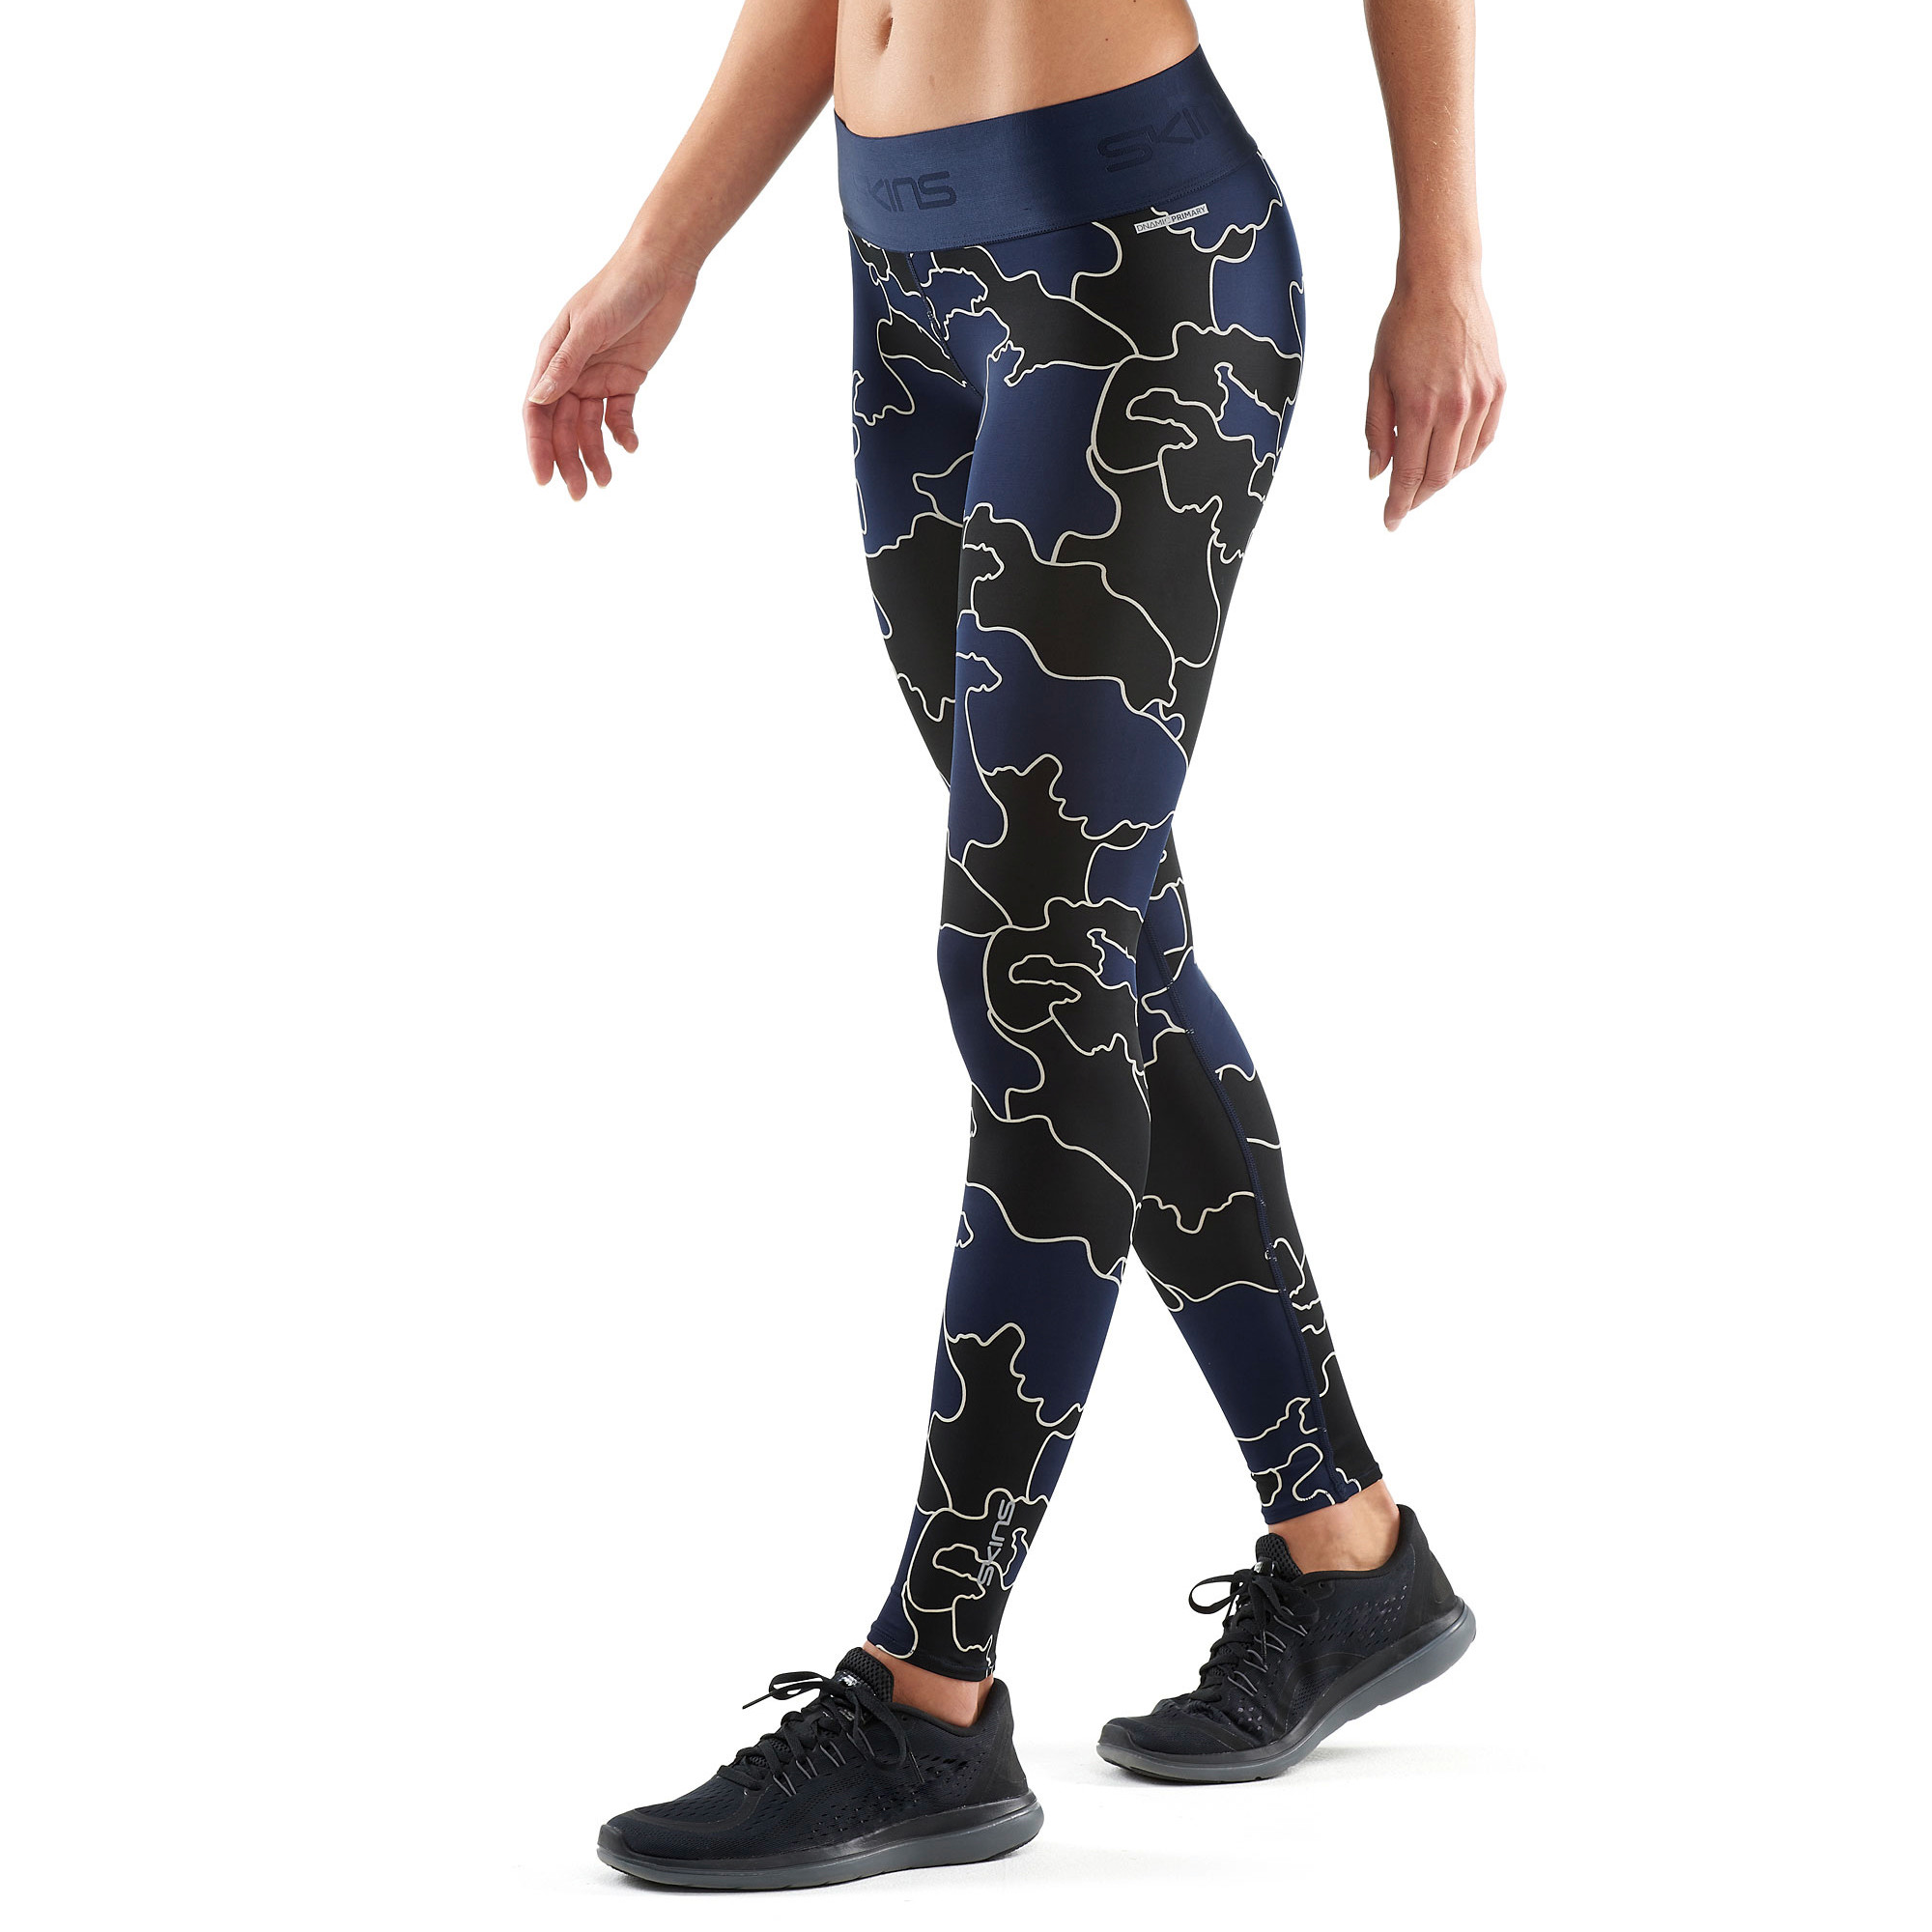 Skins Women's DNAmic PRIMARY Long Tights Myriad Blue, Buy Skins Women's  DNAmic PRIMARY Long Tights Myriad Blue here